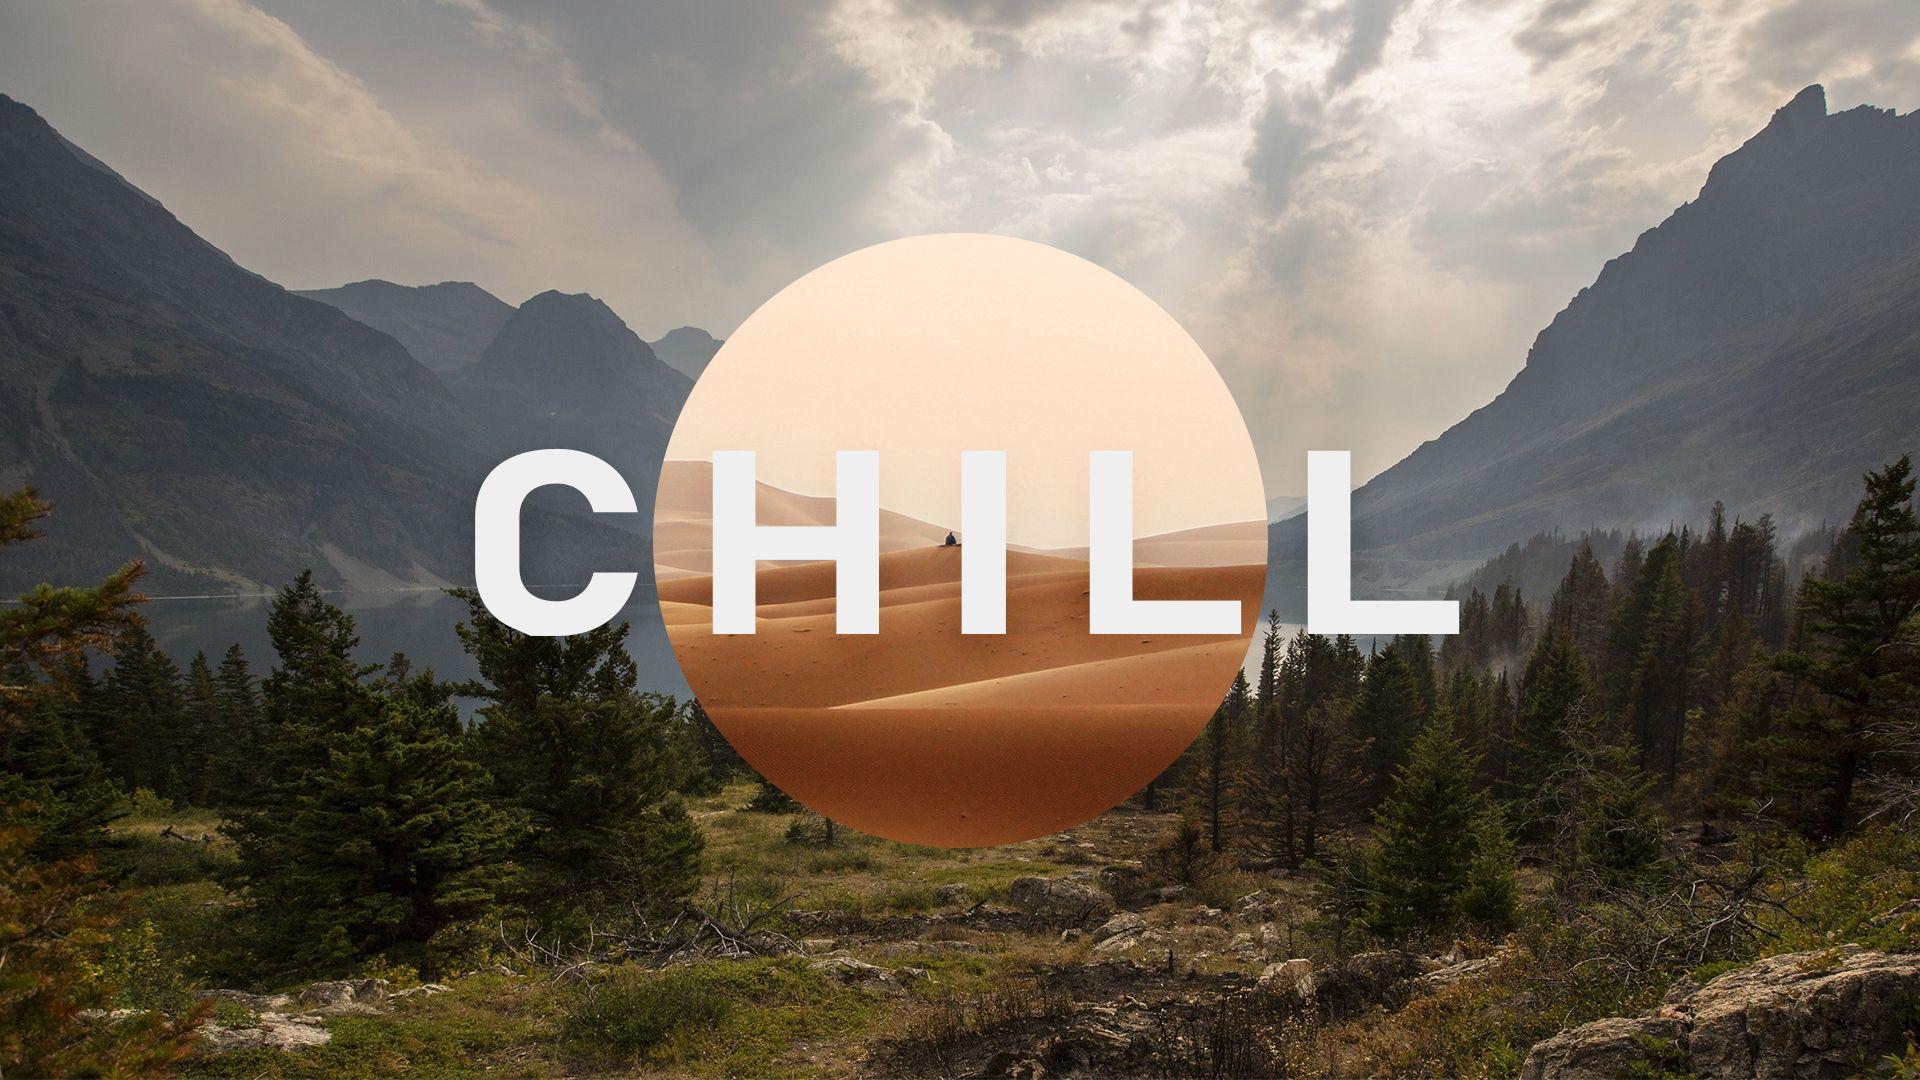 HD chill out wallpapers